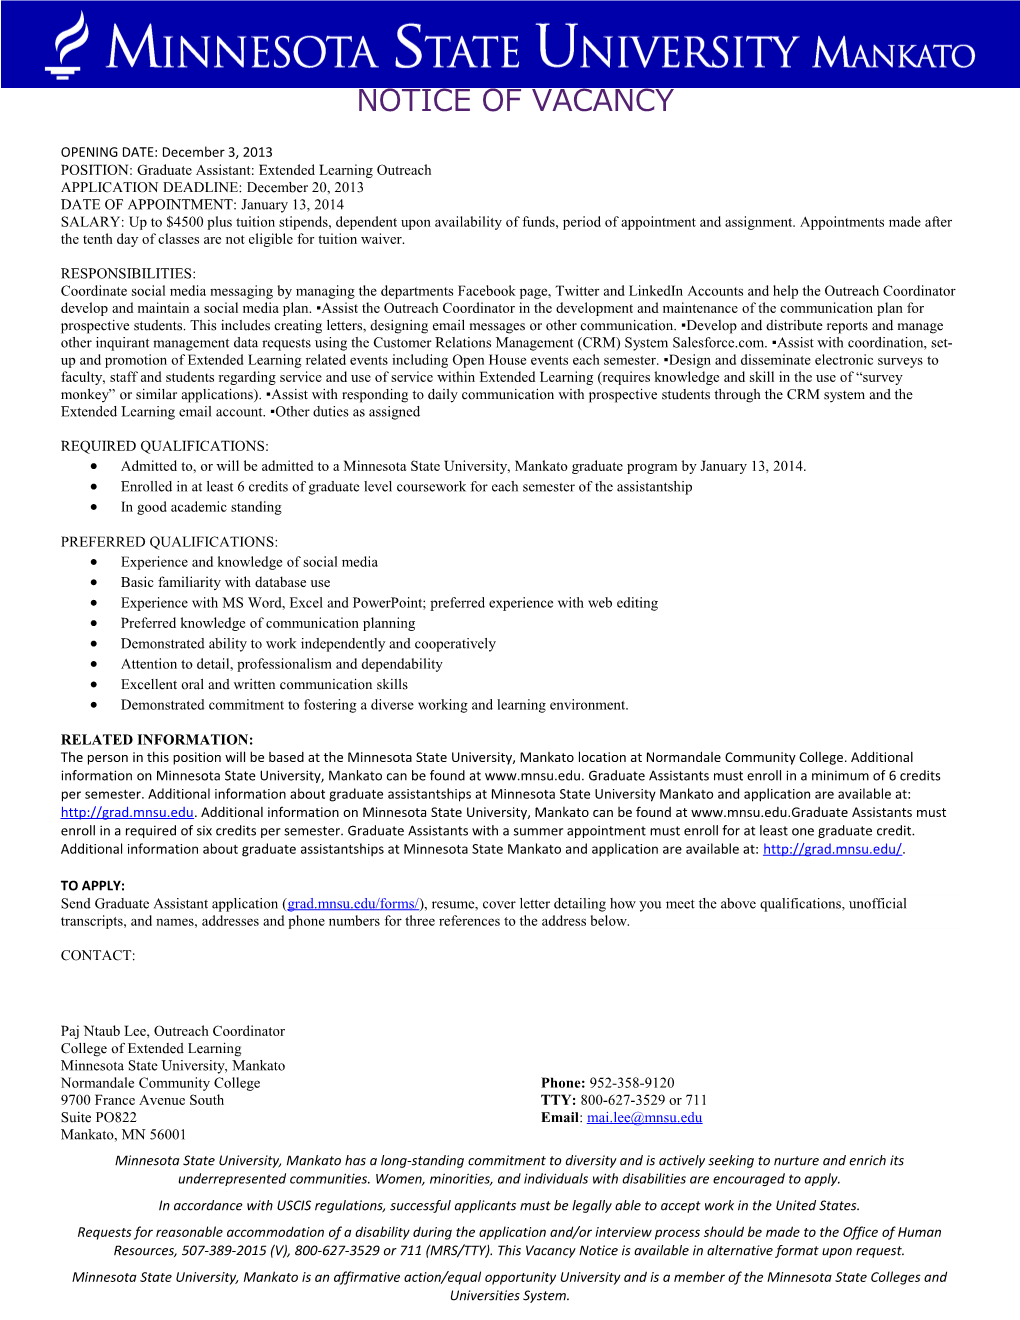 POSITION: Graduate Assistant: Extended Learning Outreach